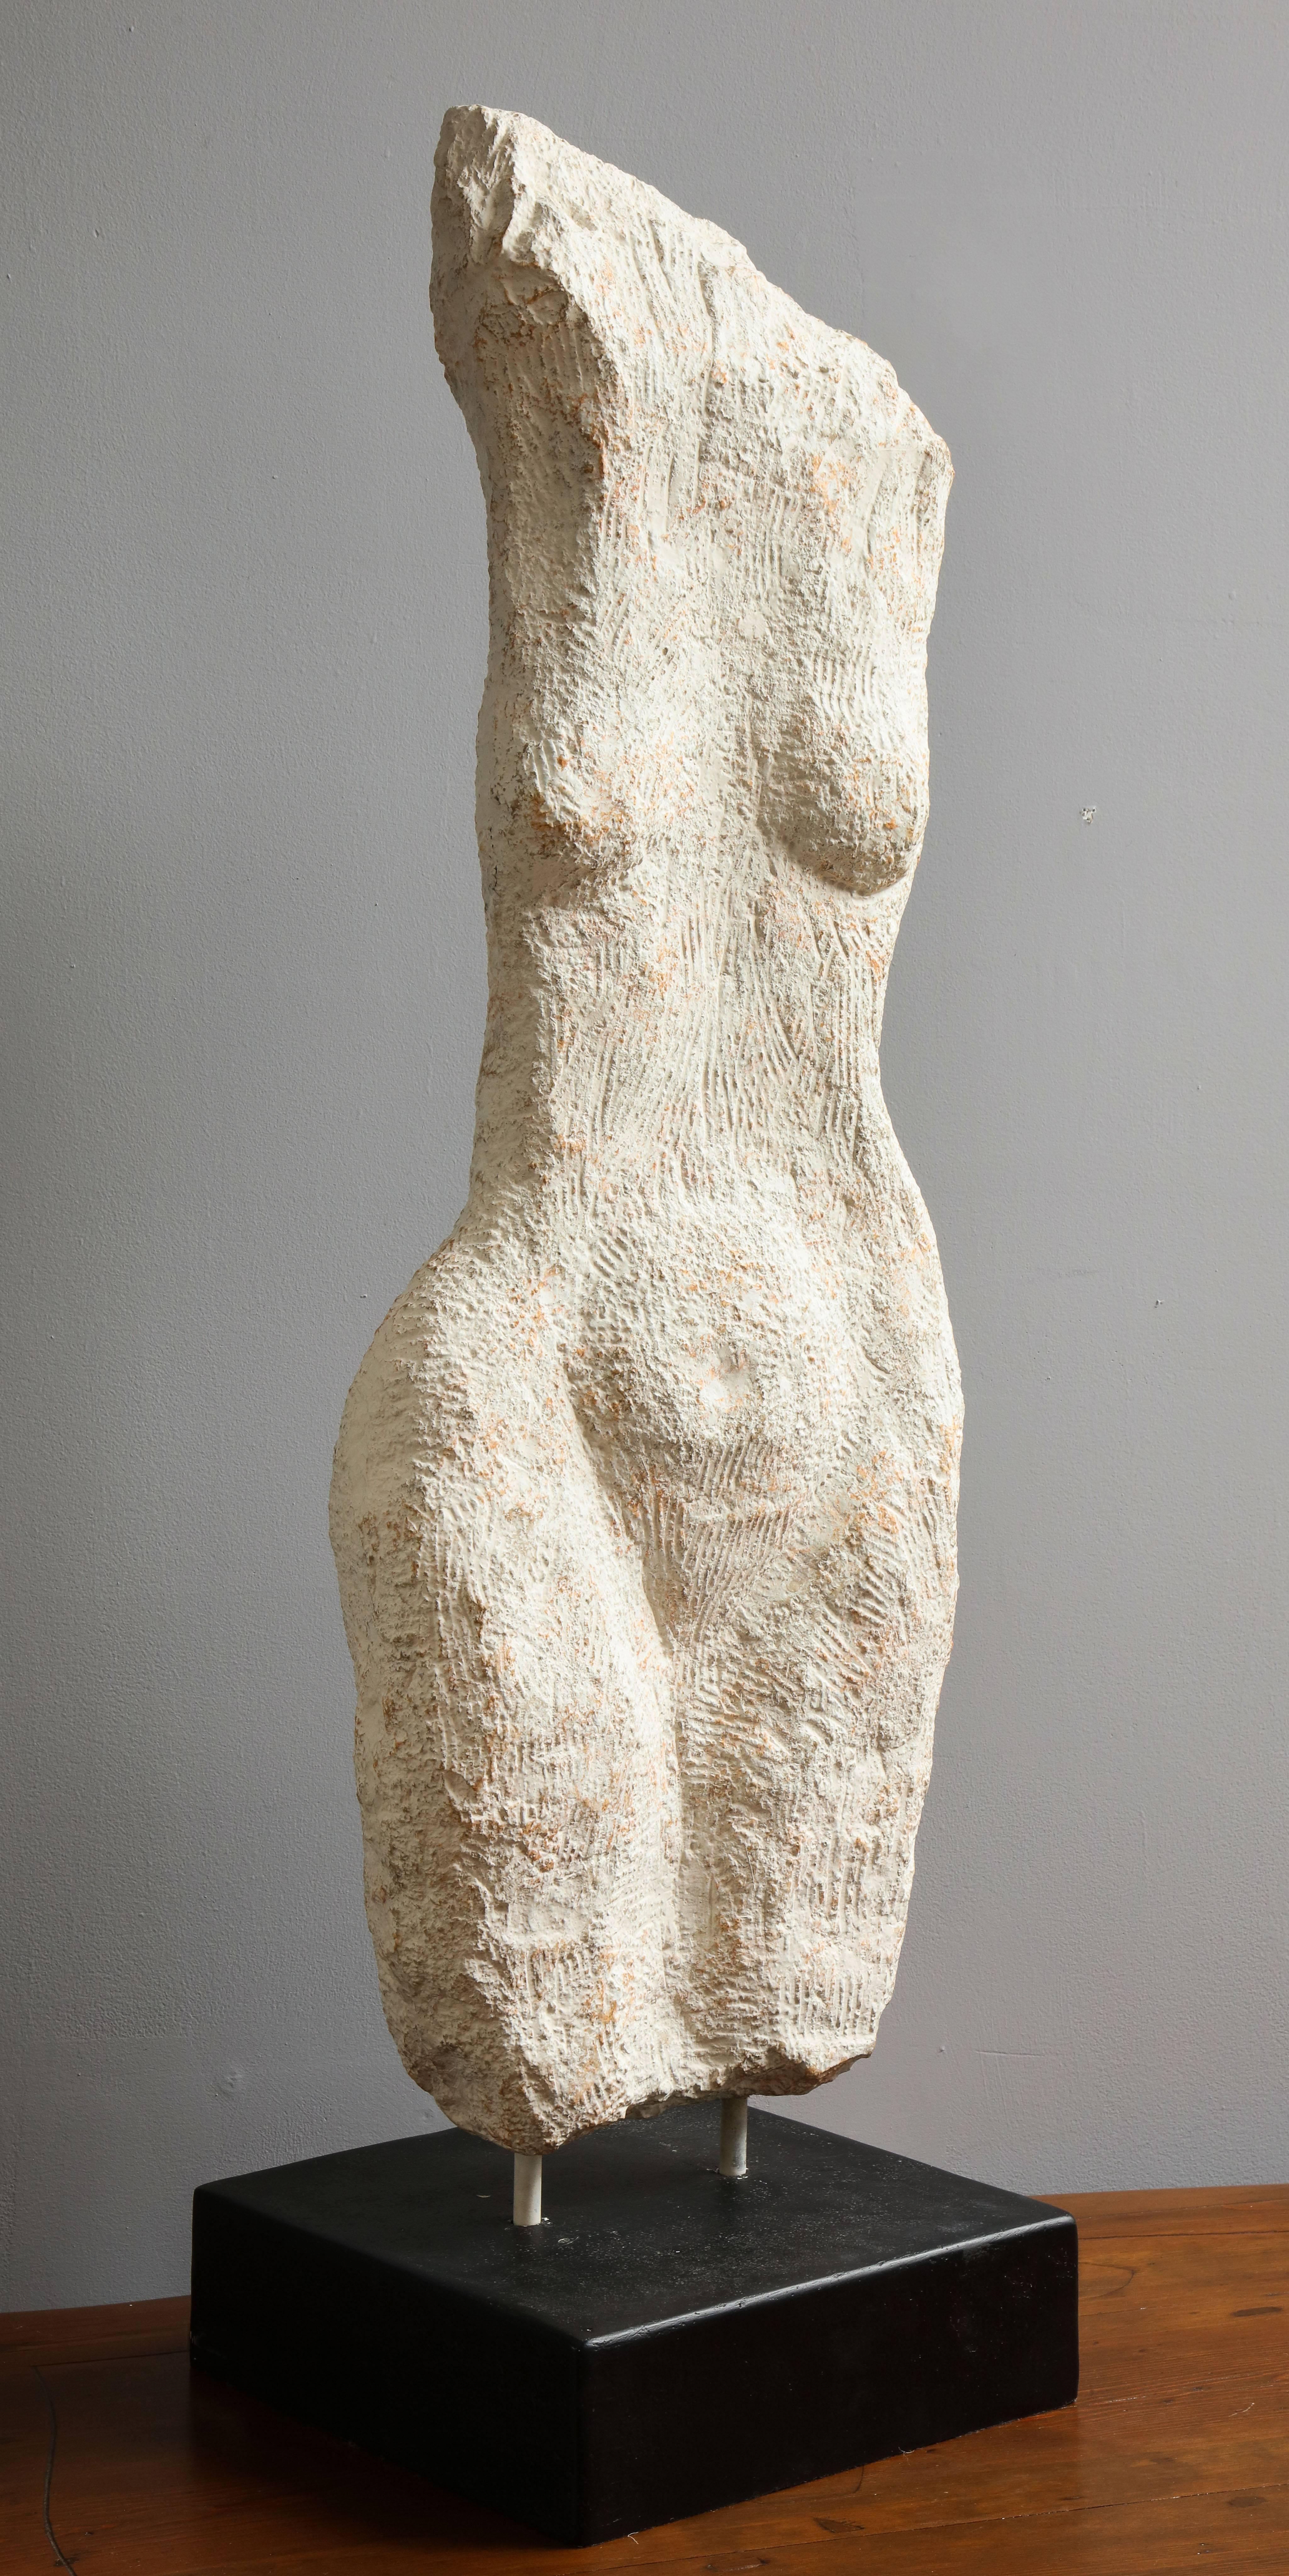 A modernist stone sculpture of a female nude torso, supported on a black painted stone plinth base.
American, 1970s
Size: 41 1/4